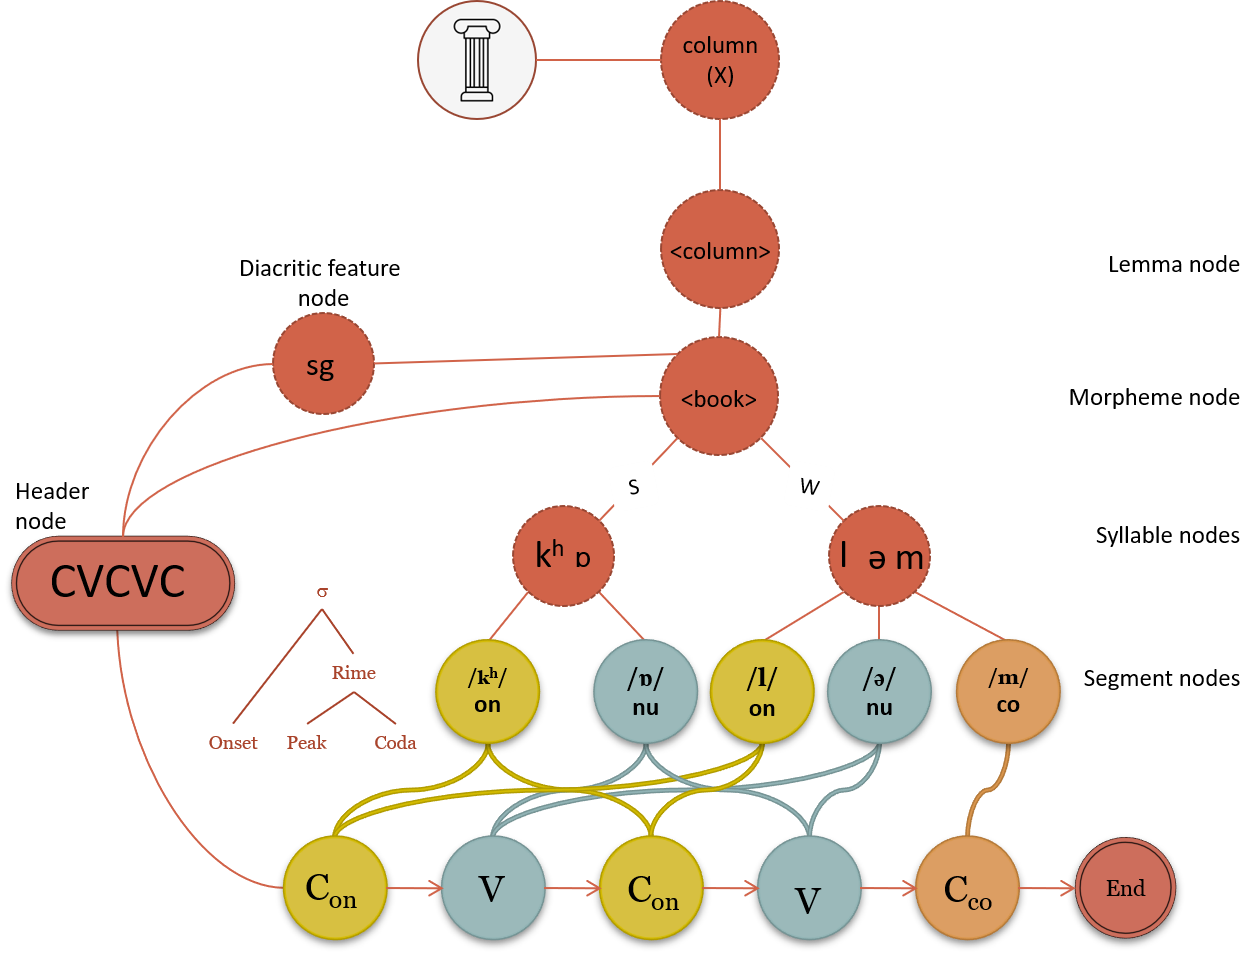 A depiction of Dell’s spreading activation model, composed on nodes illustrating the morphemes, segments, and features in a lexical network.